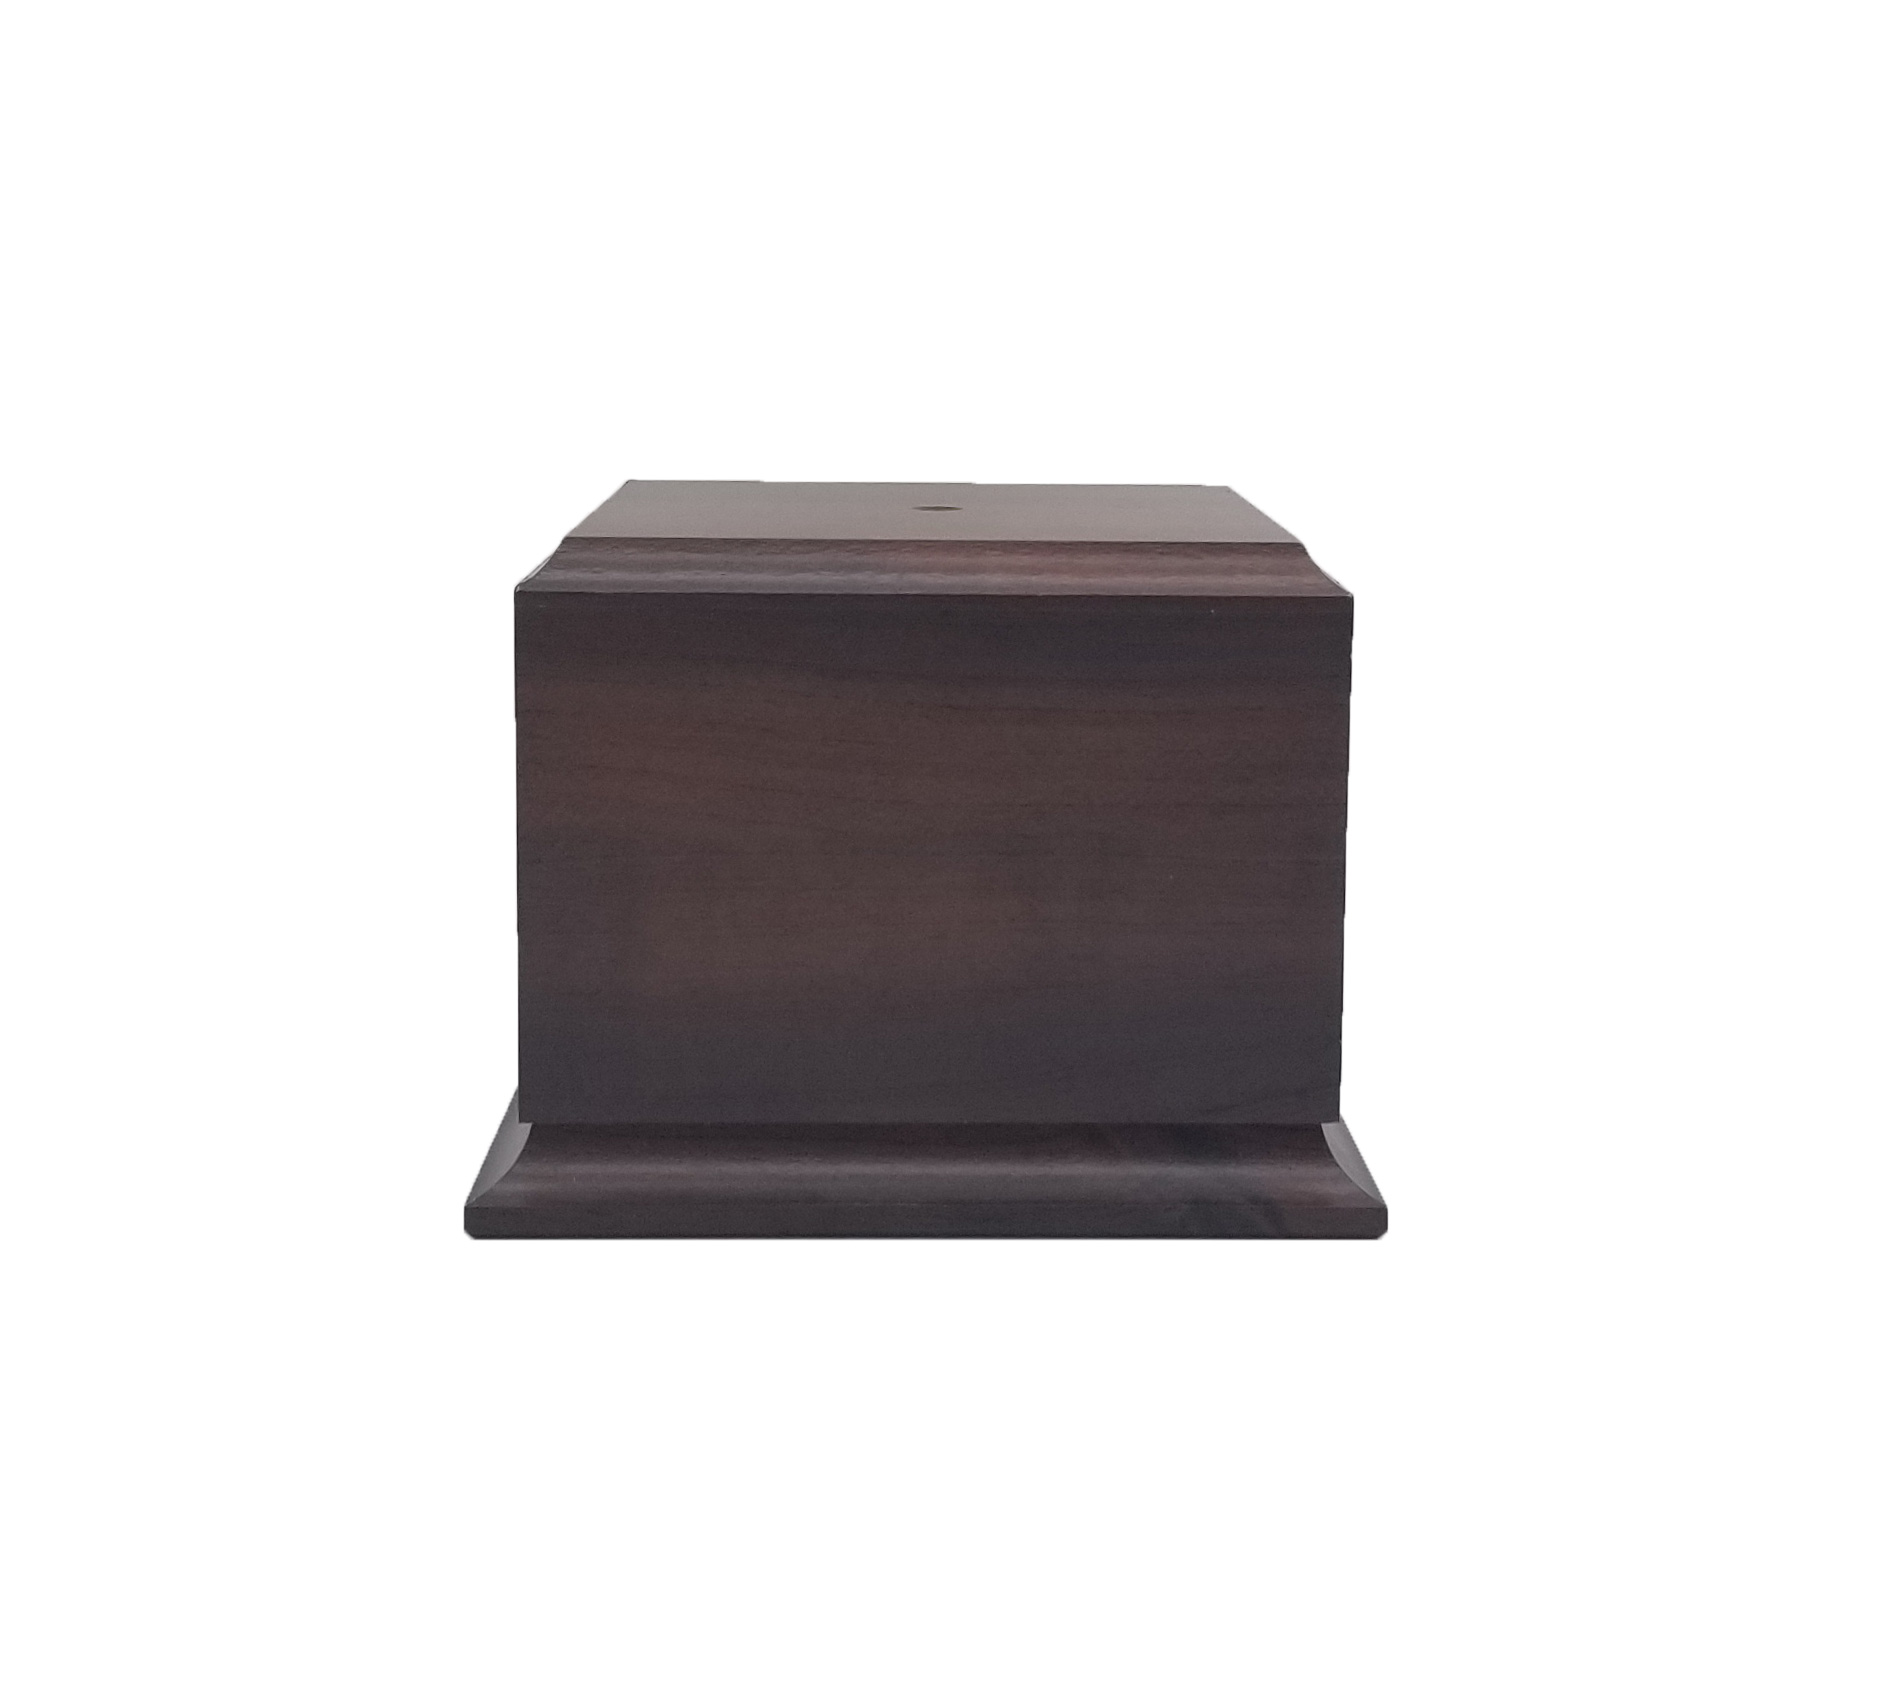 JDS 5 Tall Cherry Finish Particle Wood Base for Cups Trophies Awards Figurines